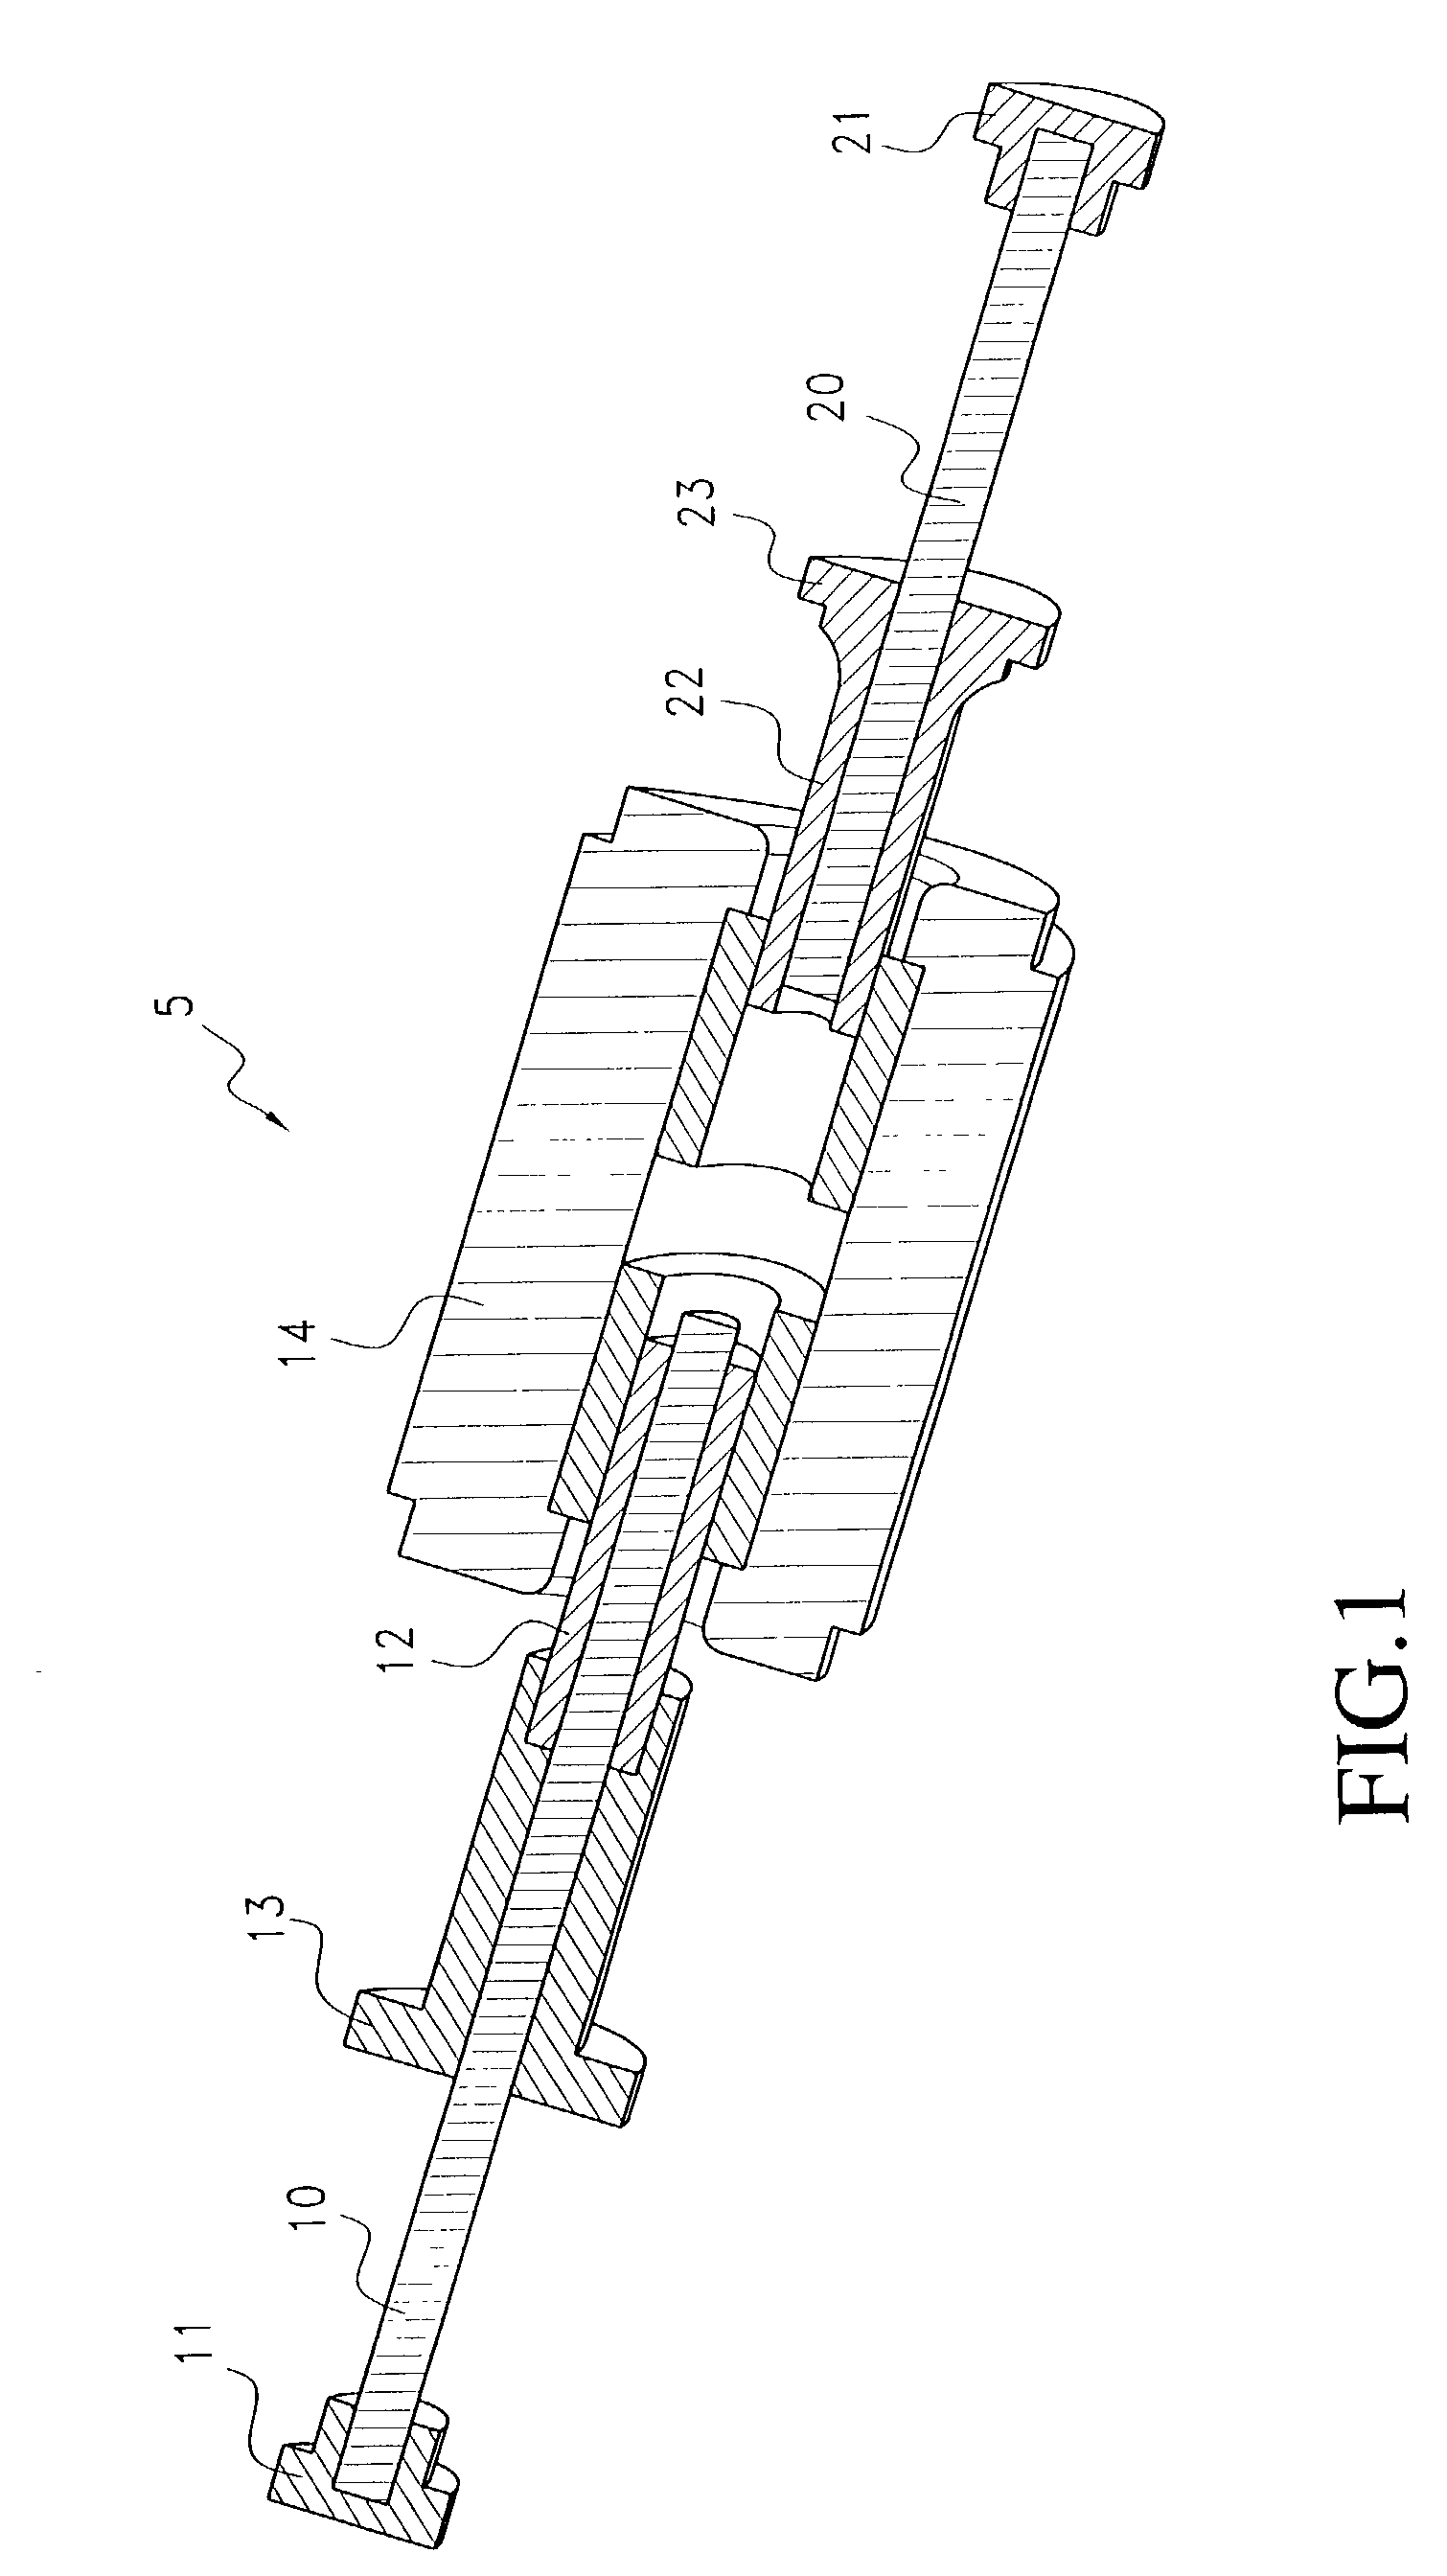 Cold forging apparatus and method for forming complex articles